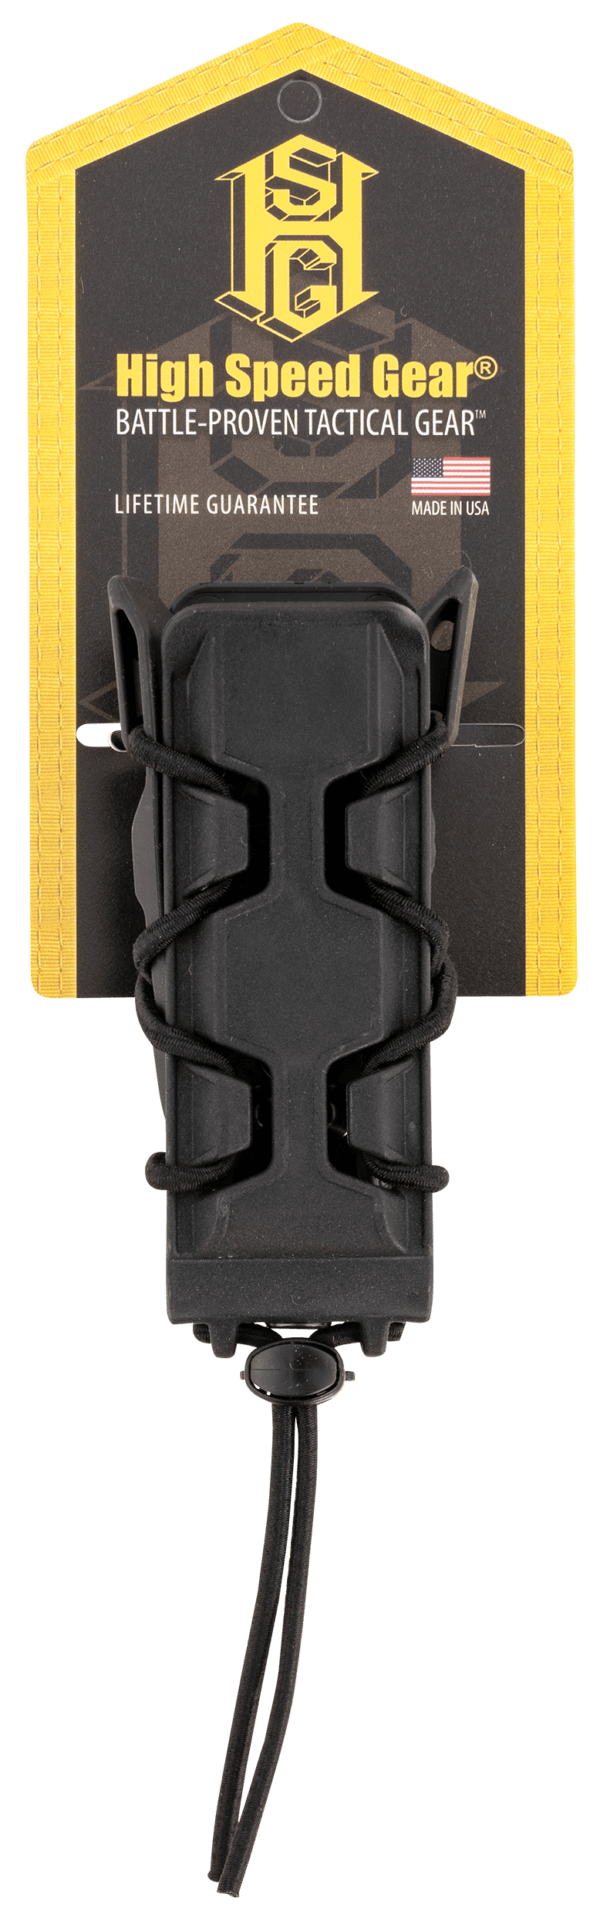 High Speed Gear 16PT01BK TACO V2 Mag Pouch Single Black Polymer Belt Clip/MOLLE U-Mount Compatible w/ Pistol Mags